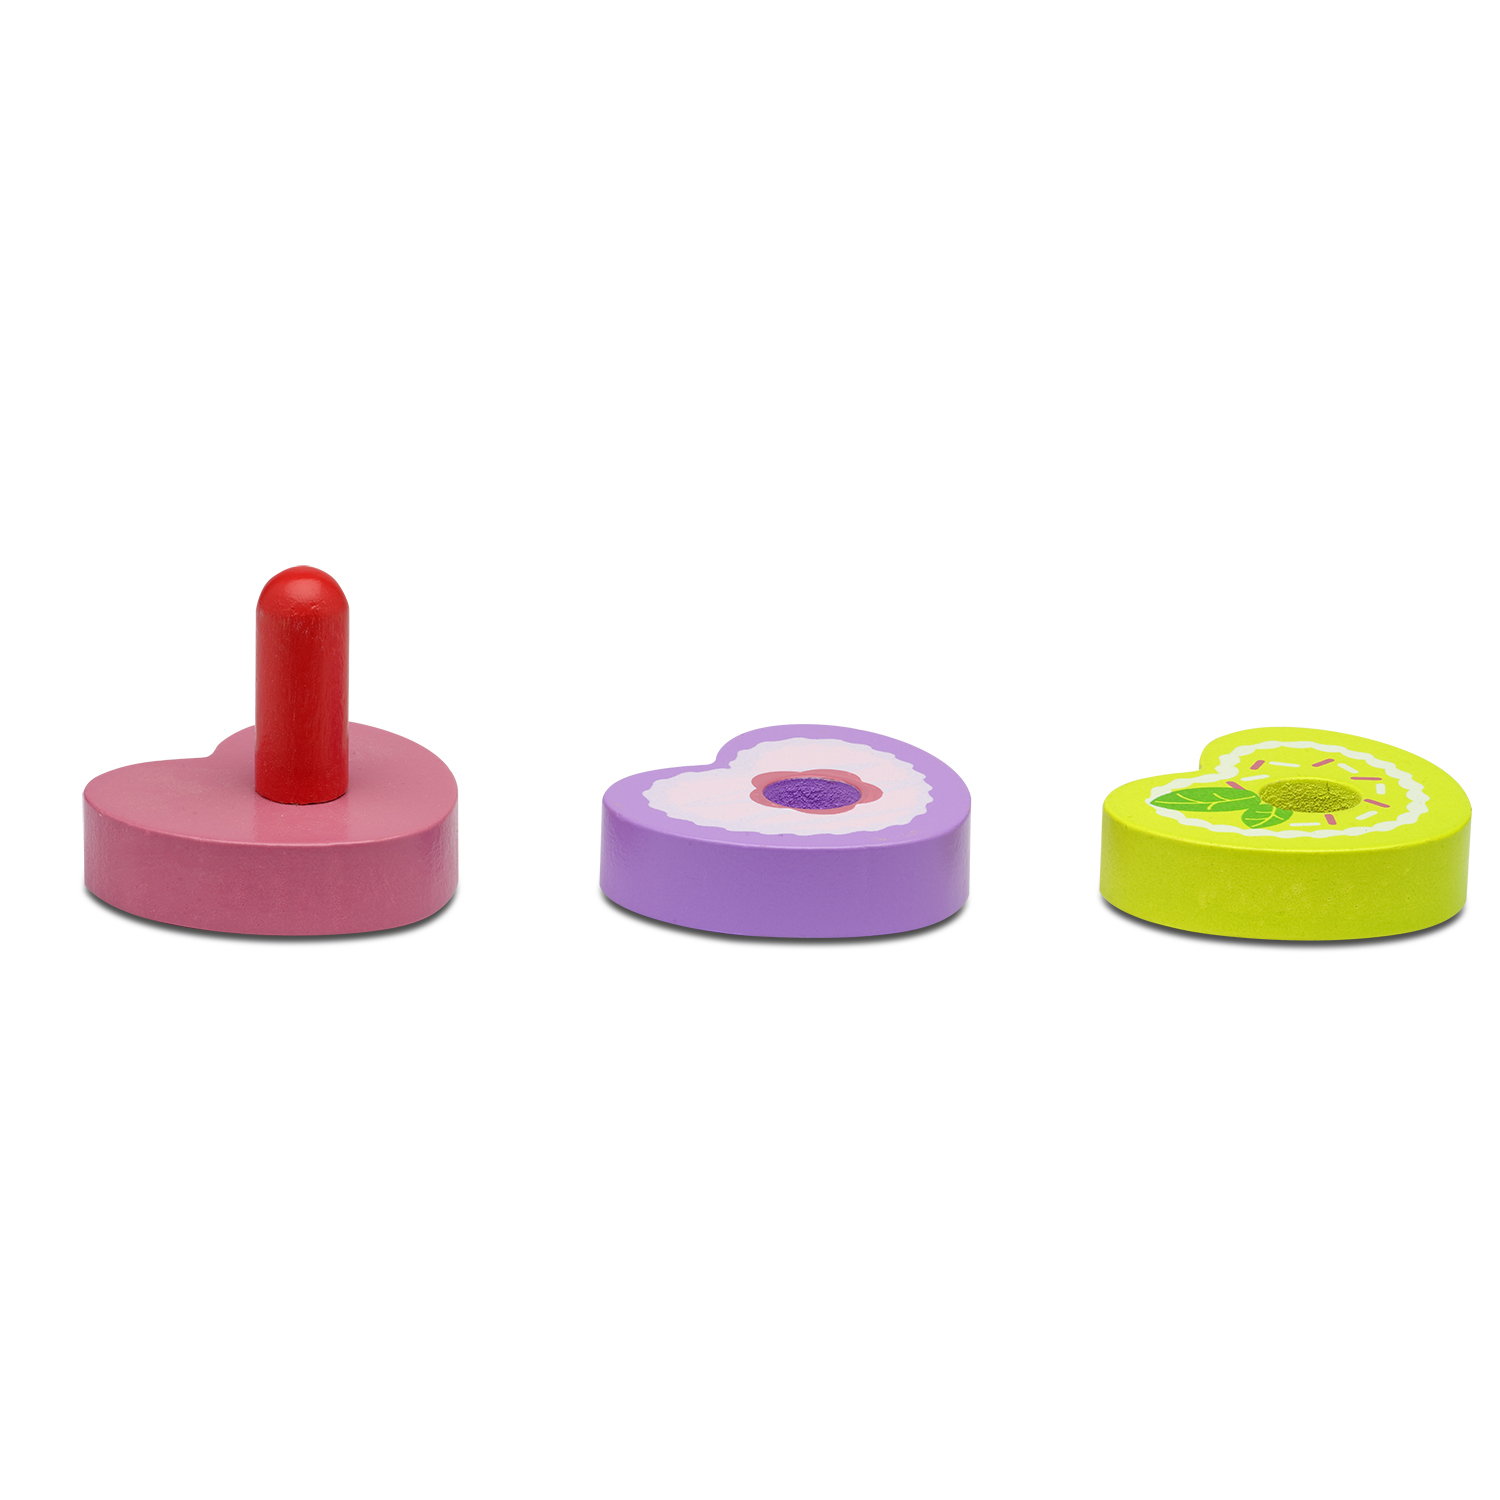 Kitchen play micki cake stand with toy cakes